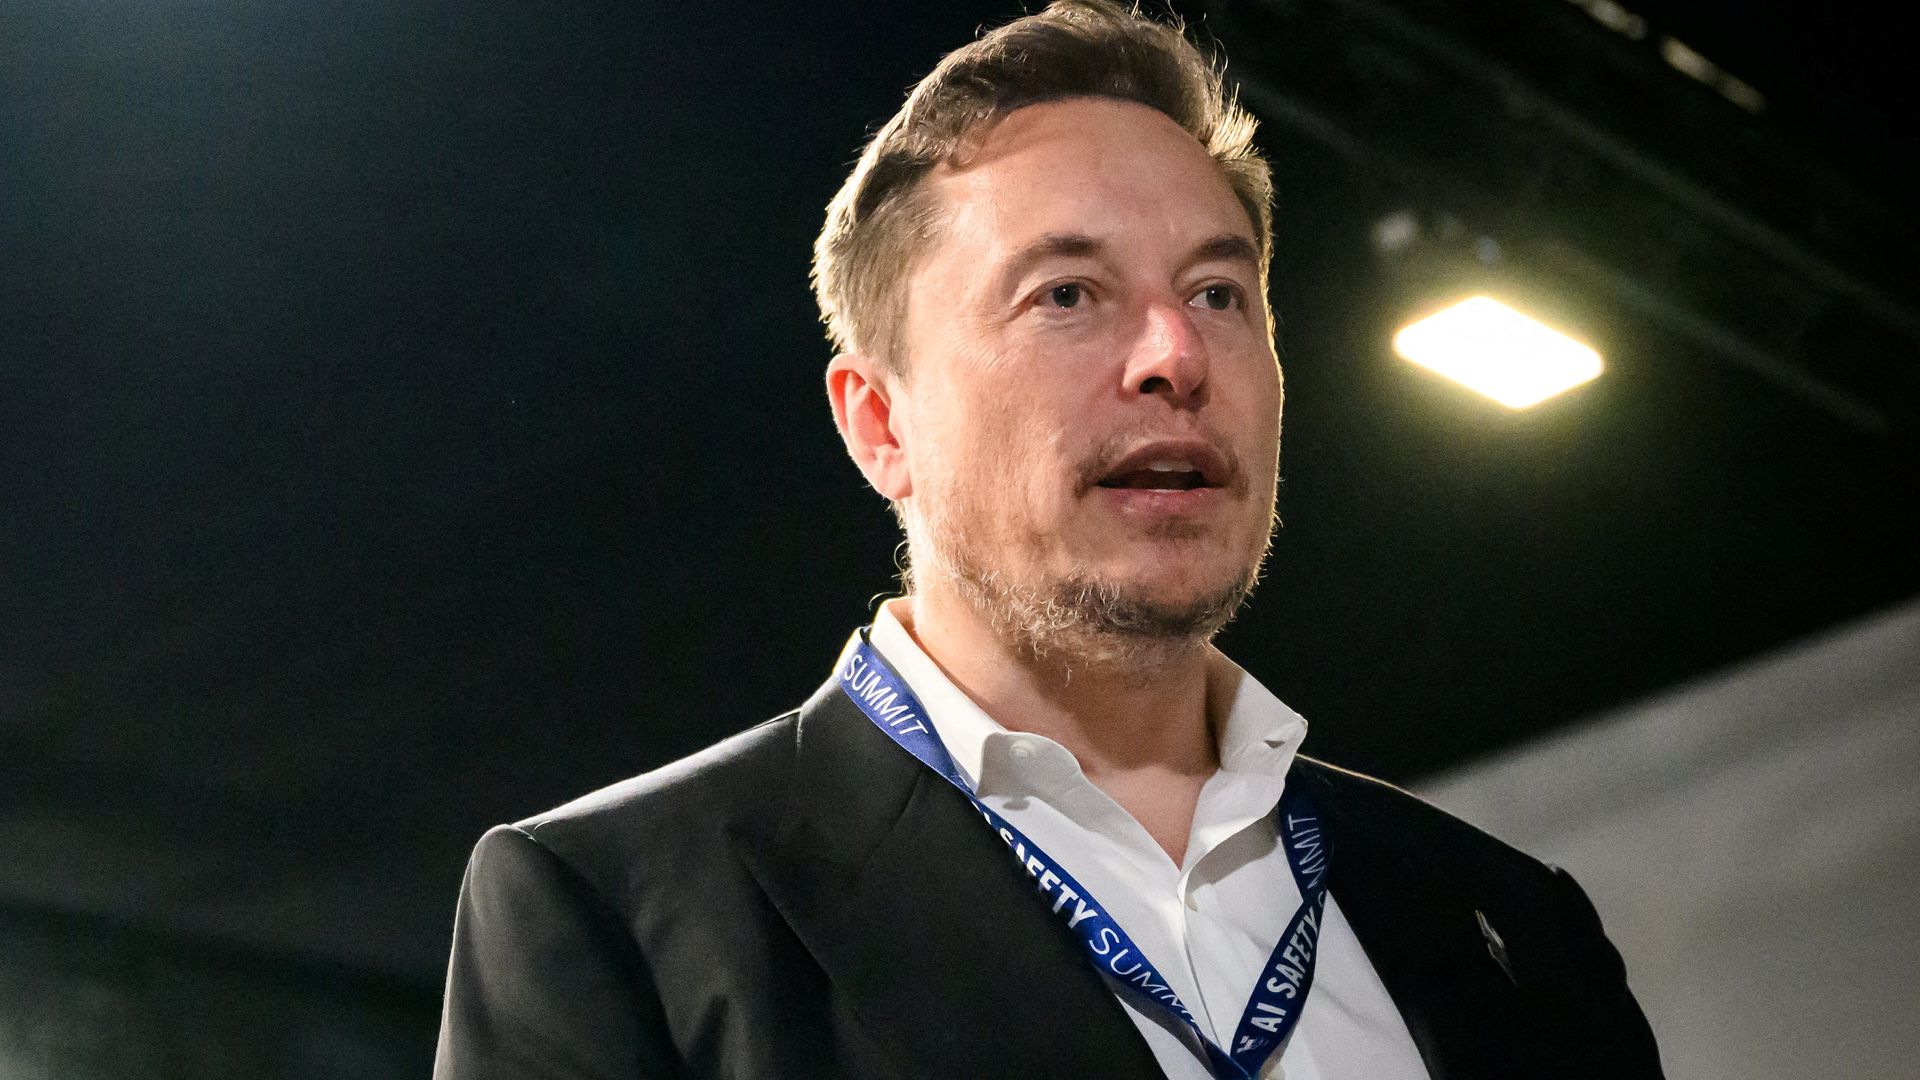 Elon Musk's week is marked by a nullified  billion compensation package, recalls, Neuralink's first human trial and environmental scrutiny.